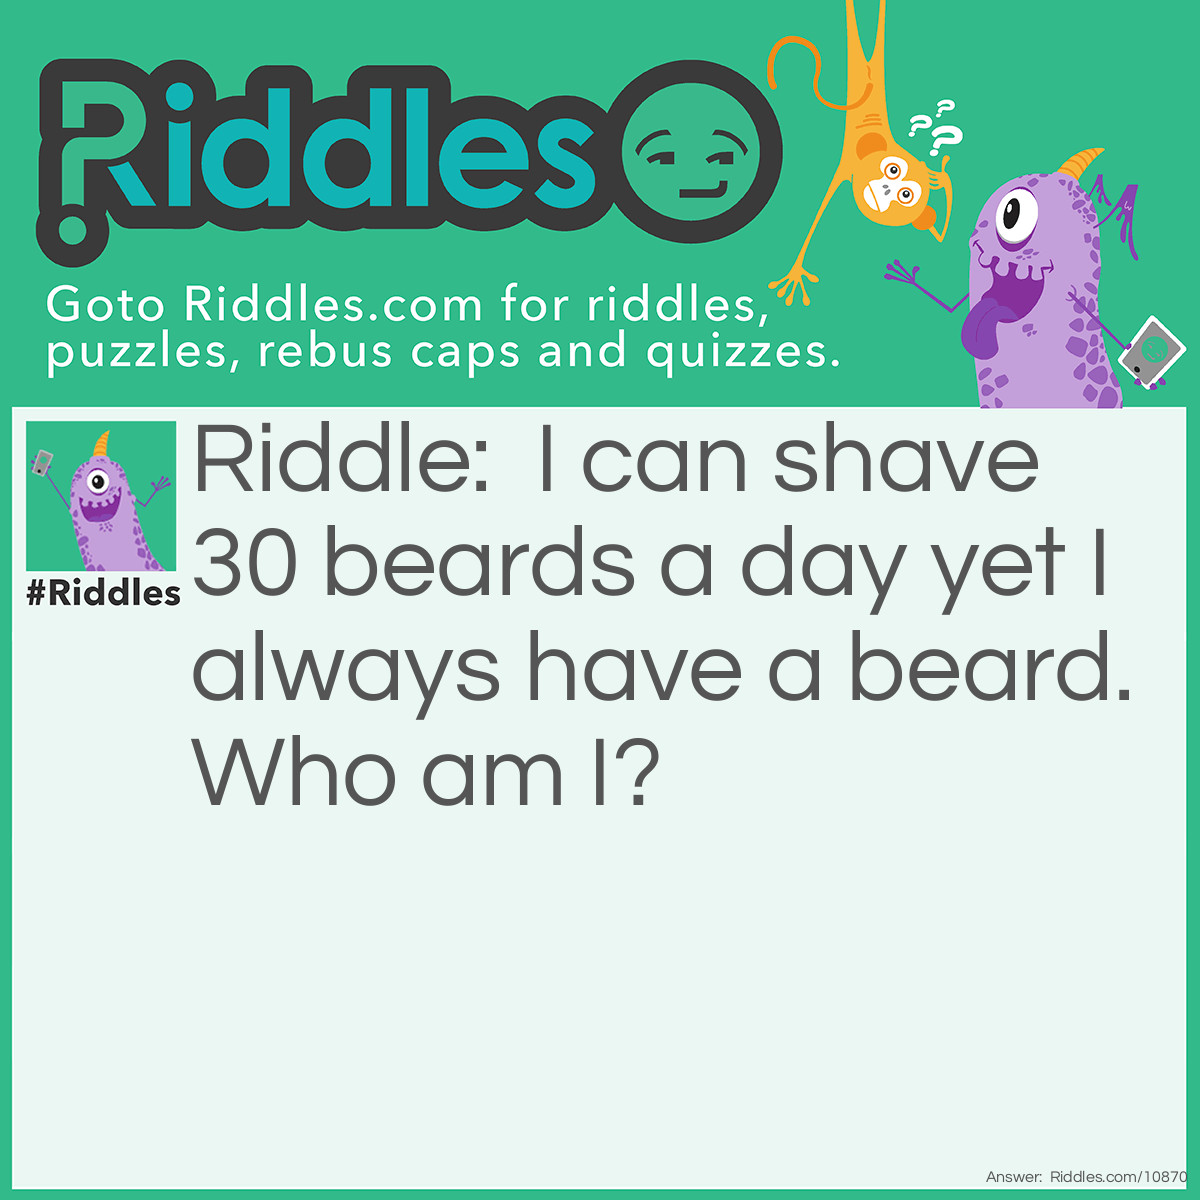 Riddle: I can shave 30 beards a day yet I always have a beard. Who am I? Answer: The barber.